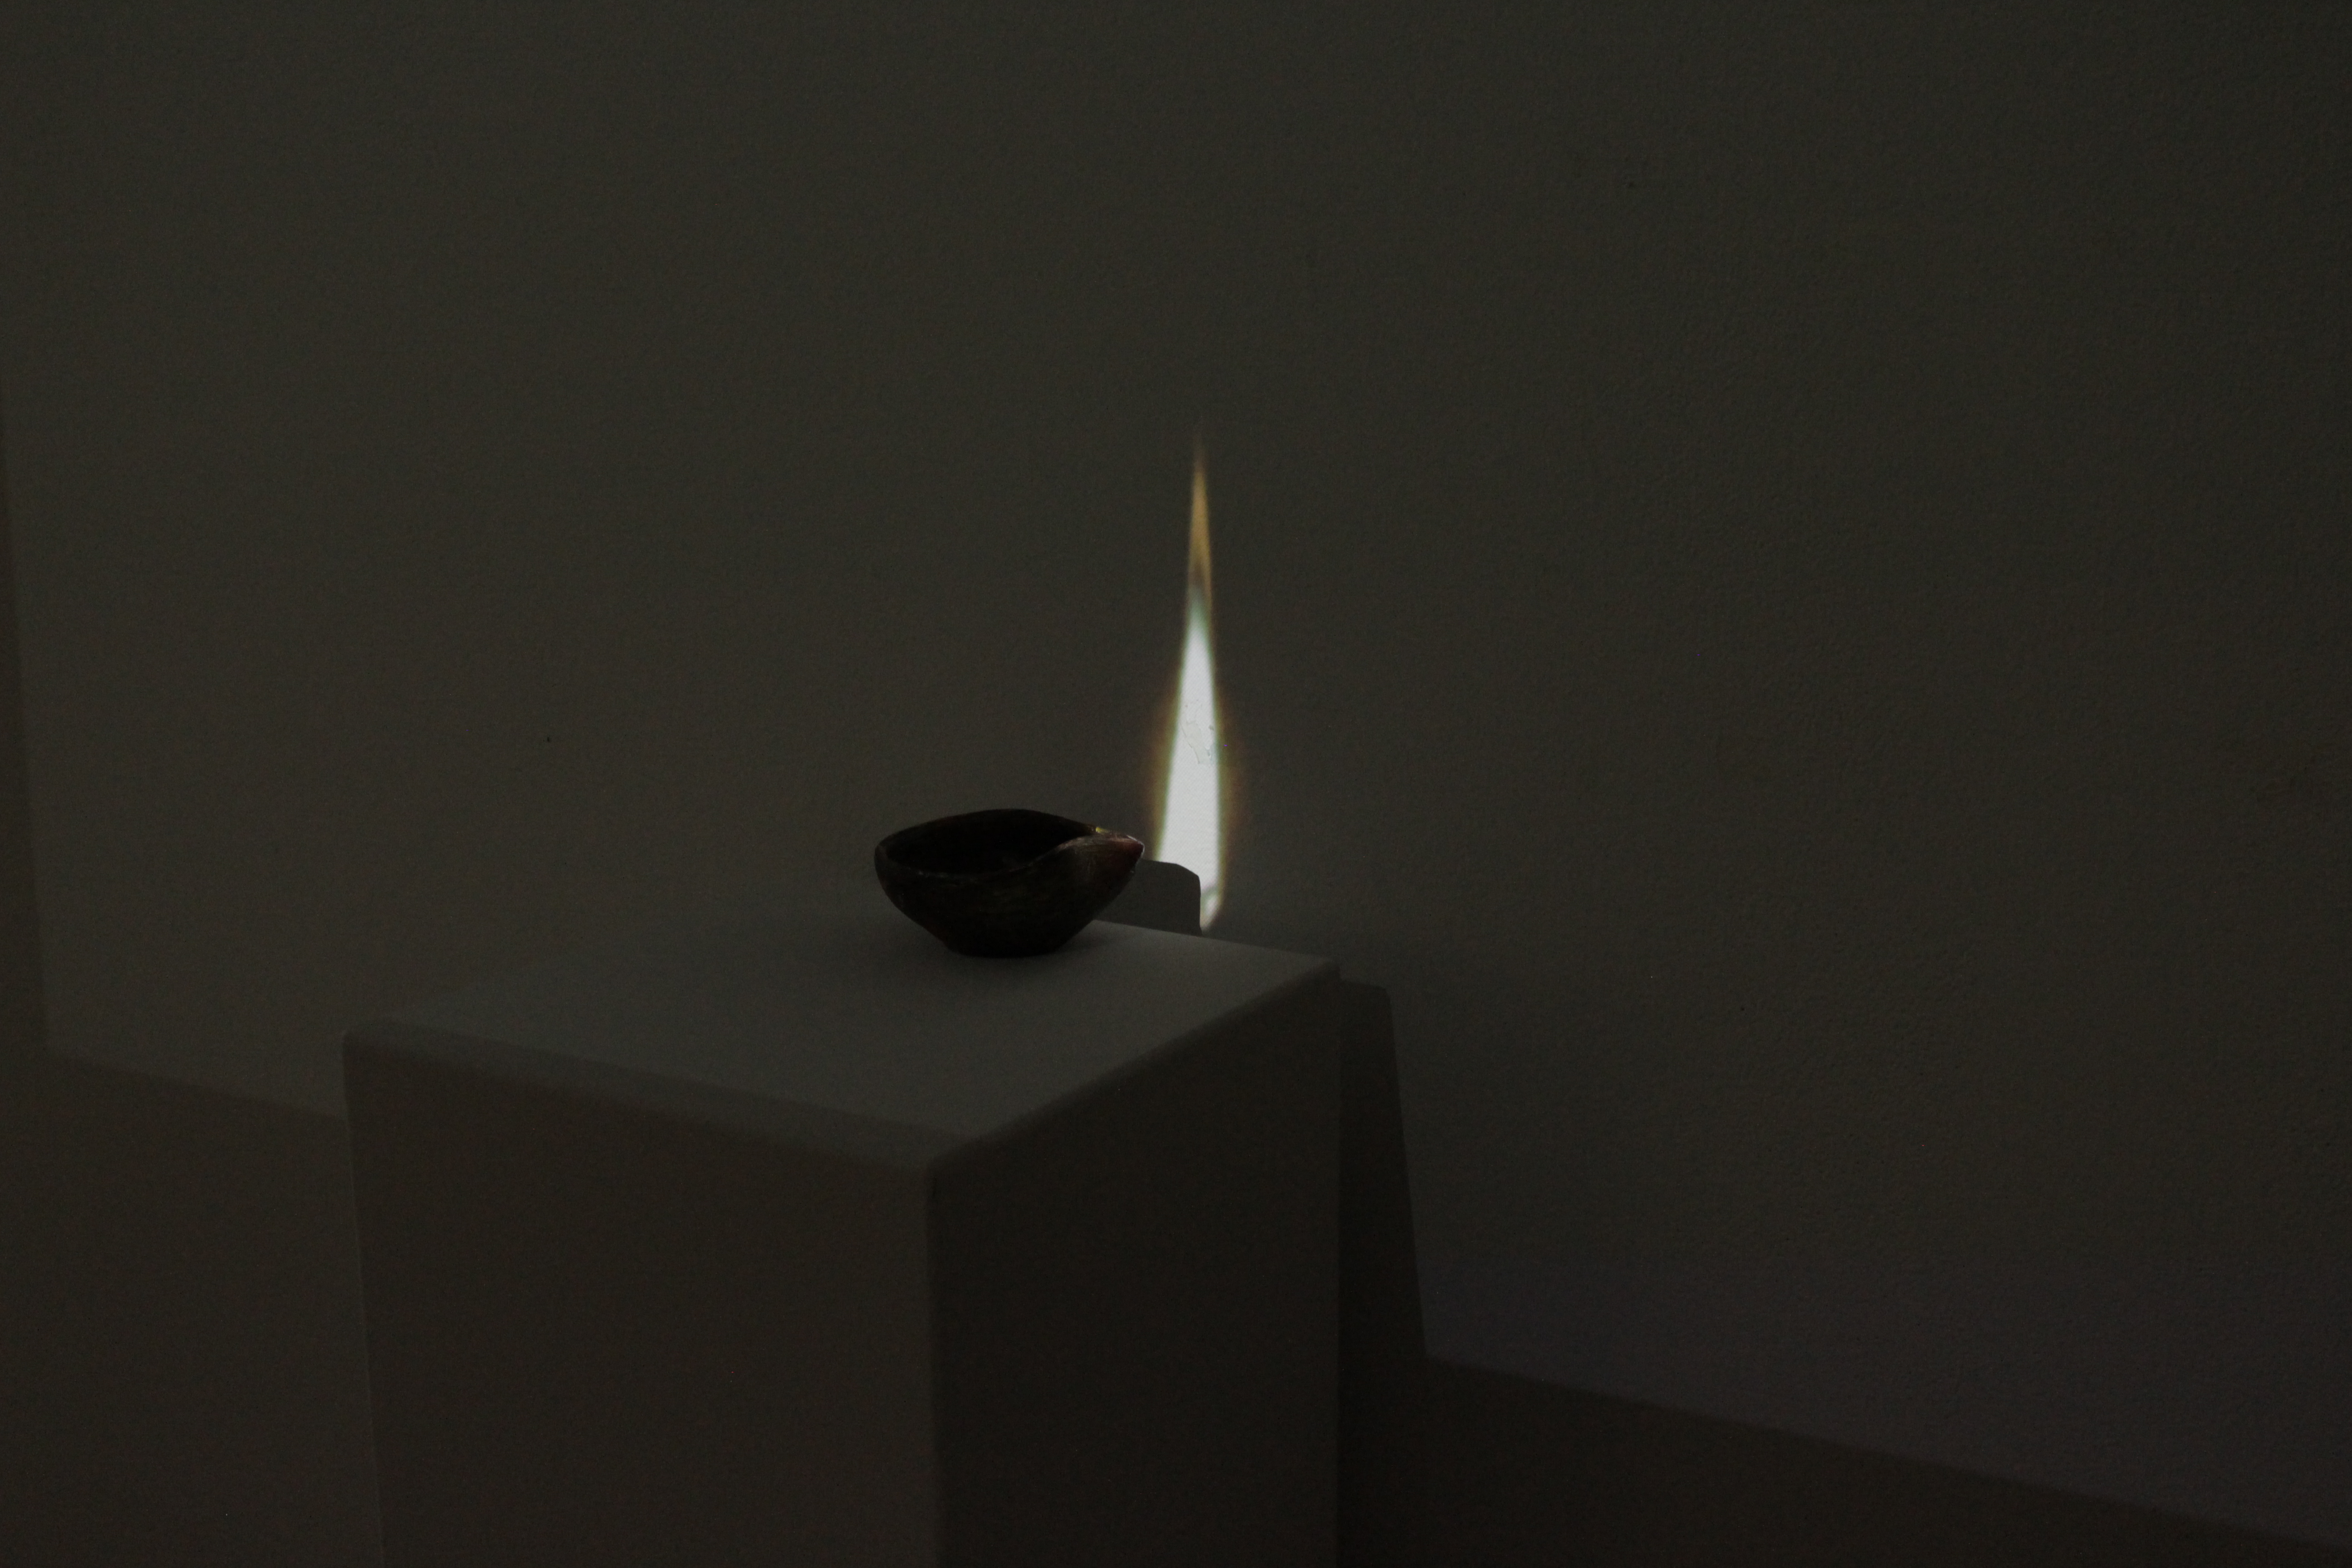 Series of Evocative Objects (Oil Lamp)